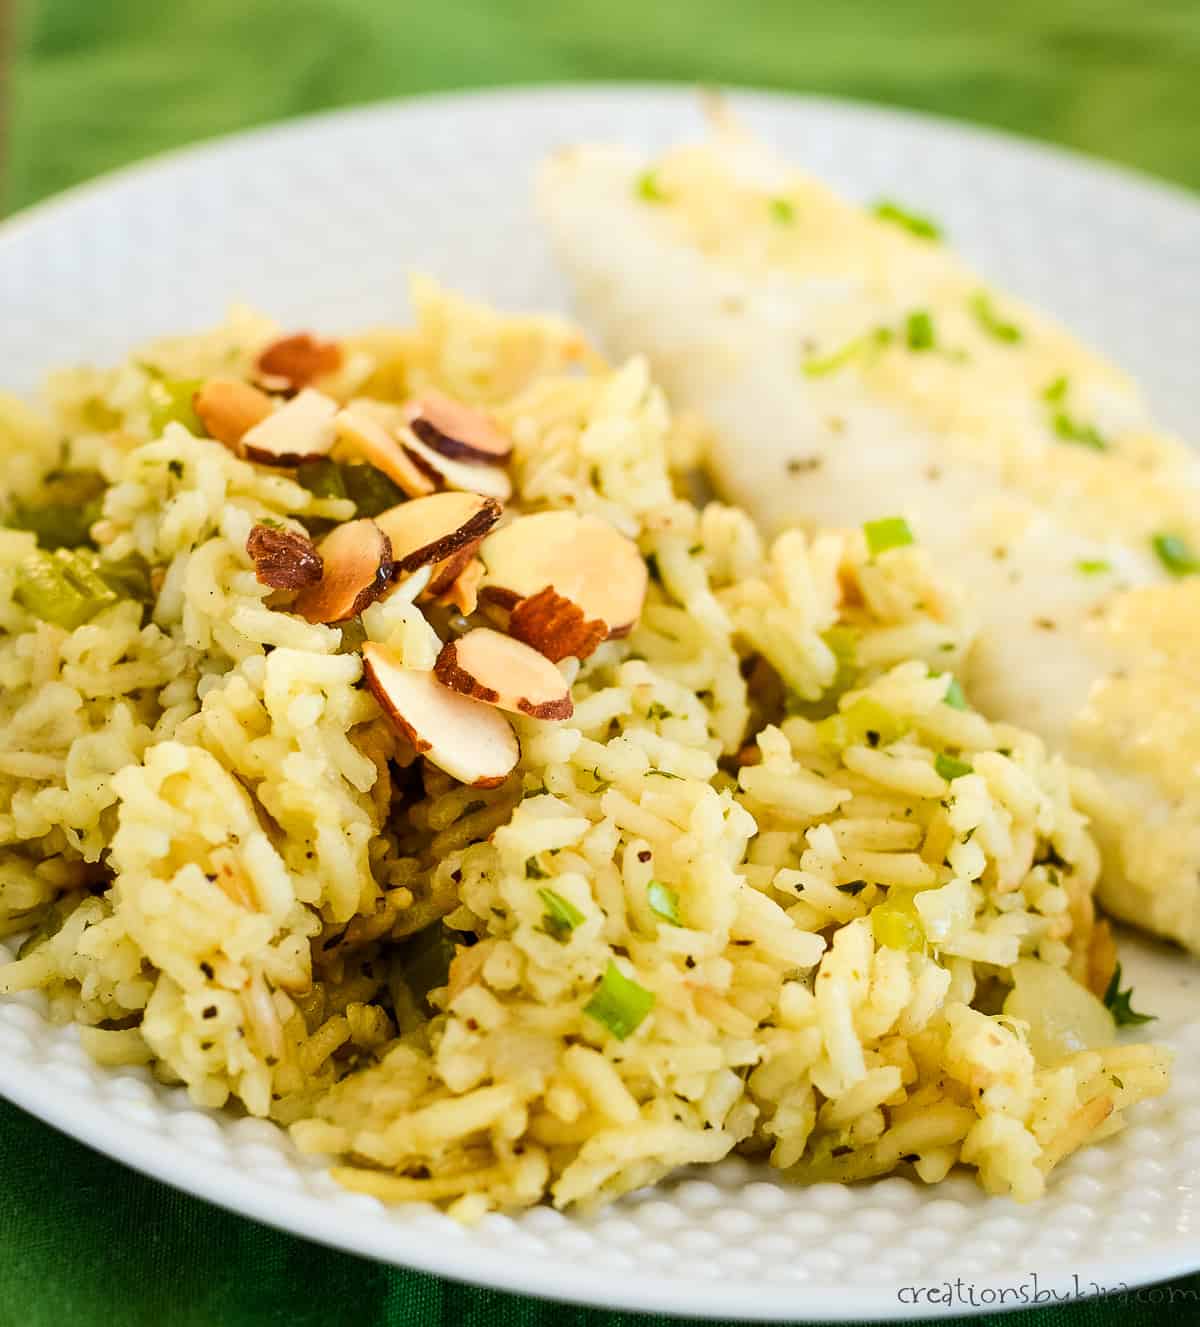 plate of tilapia and almond pilaf rice